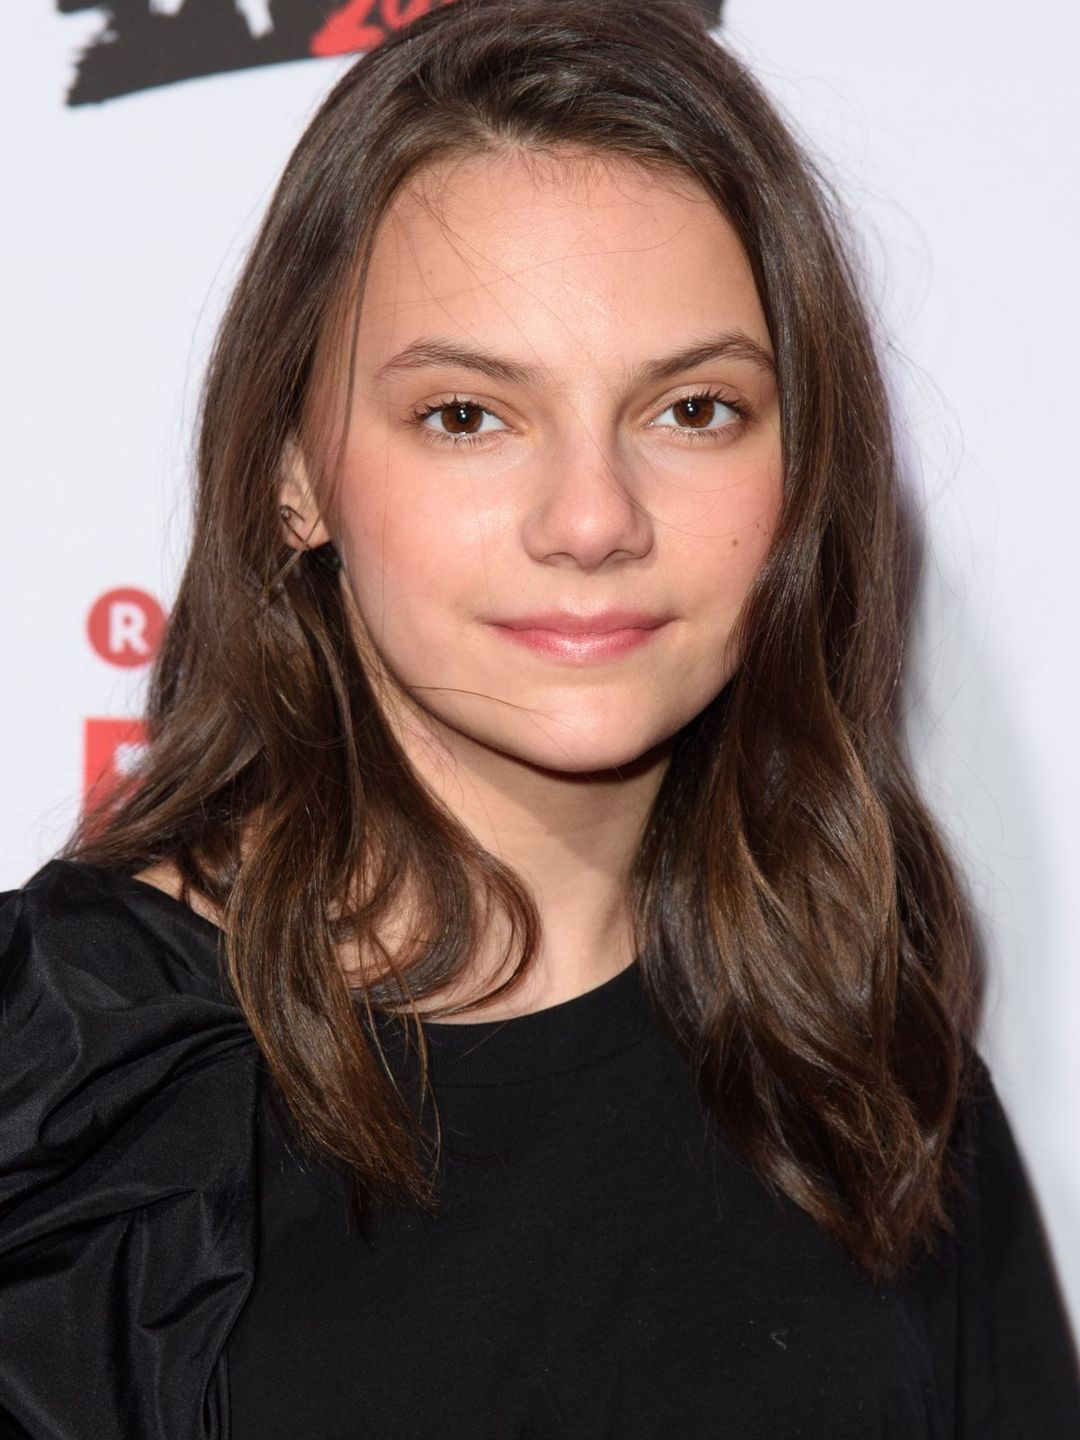 Dafne Keen young age